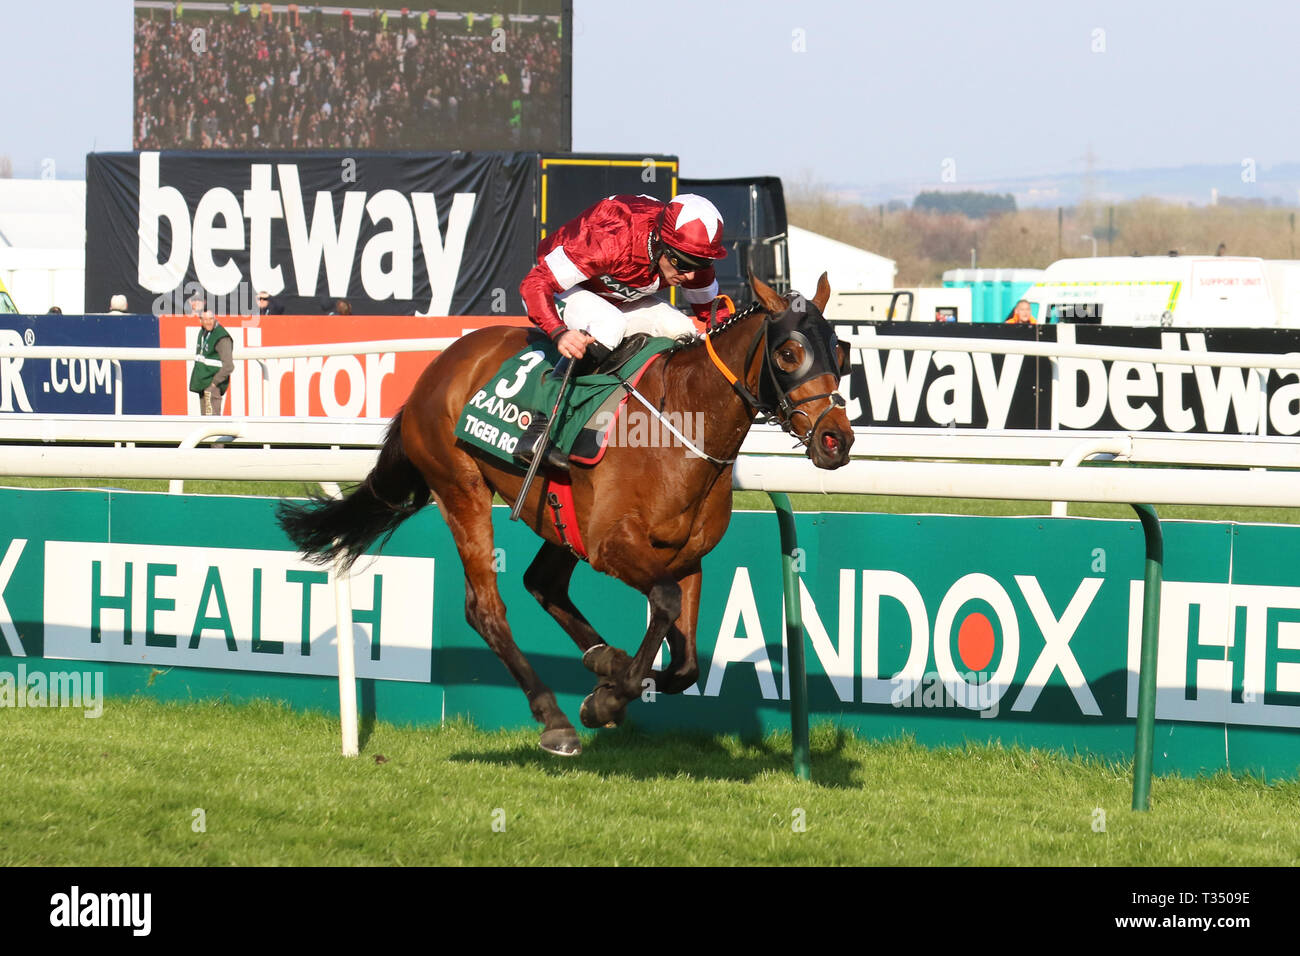 AINTREE, Liverpool, UK. Apr, 2019. Tiger Roll winner of the 2019 Randox Grand National ridden by D N Russell. He becomes the first horse to since Red Rum 45 years ago to win the hurdles event race back-to-back. 40 runners, 30 fences and more than four-and-a-quarter miles, the National is the ultimate test for horses and riders. Stock Photo